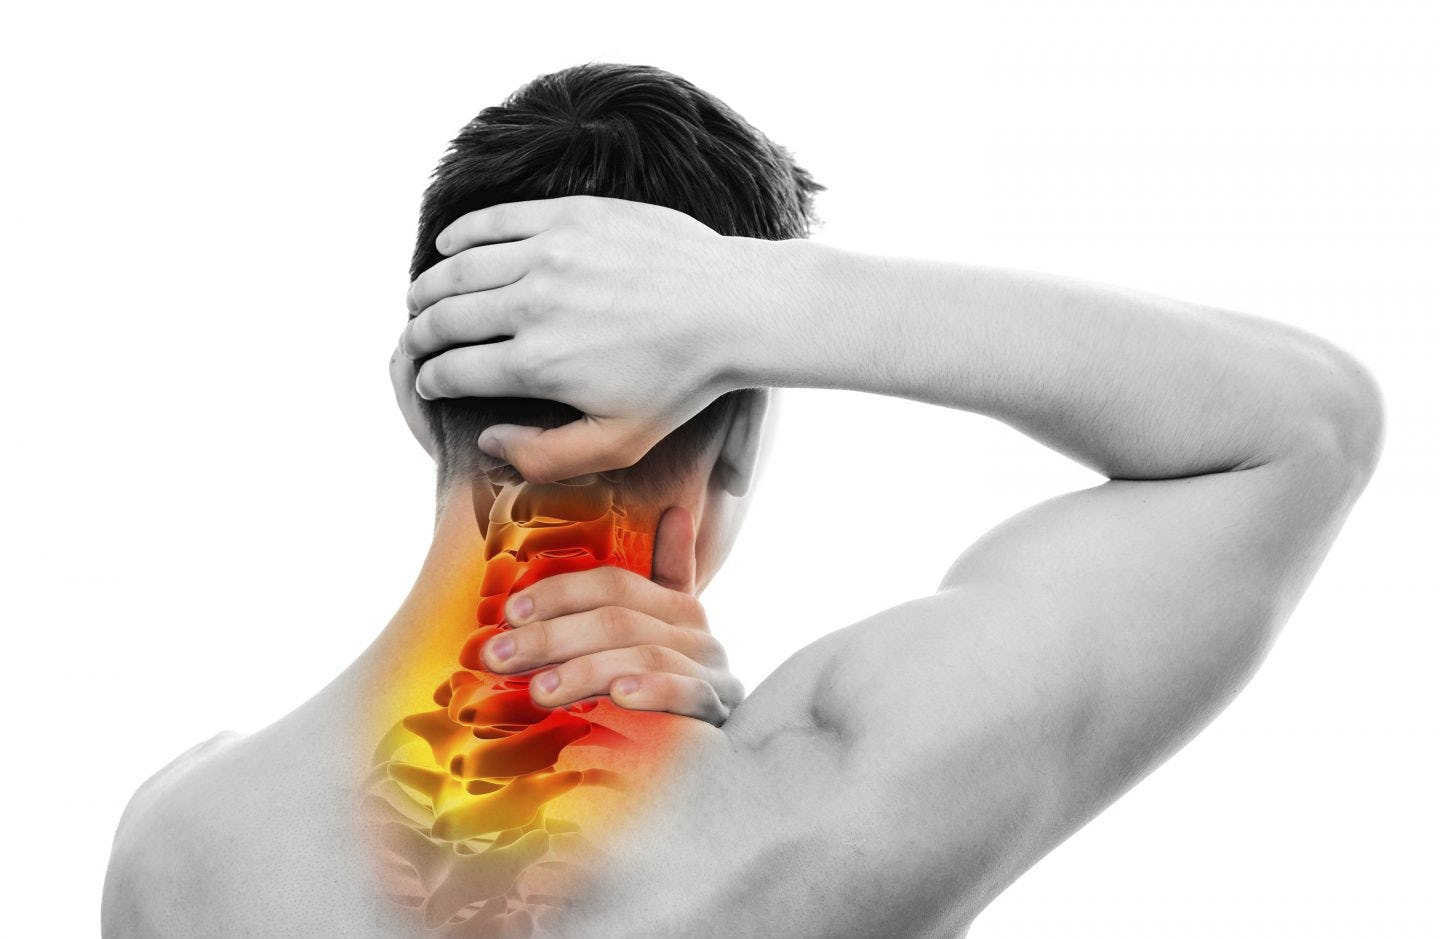 Elbow, Wrist, And Hand Pain Relief - Muscle & Spine Rehabilitation Center